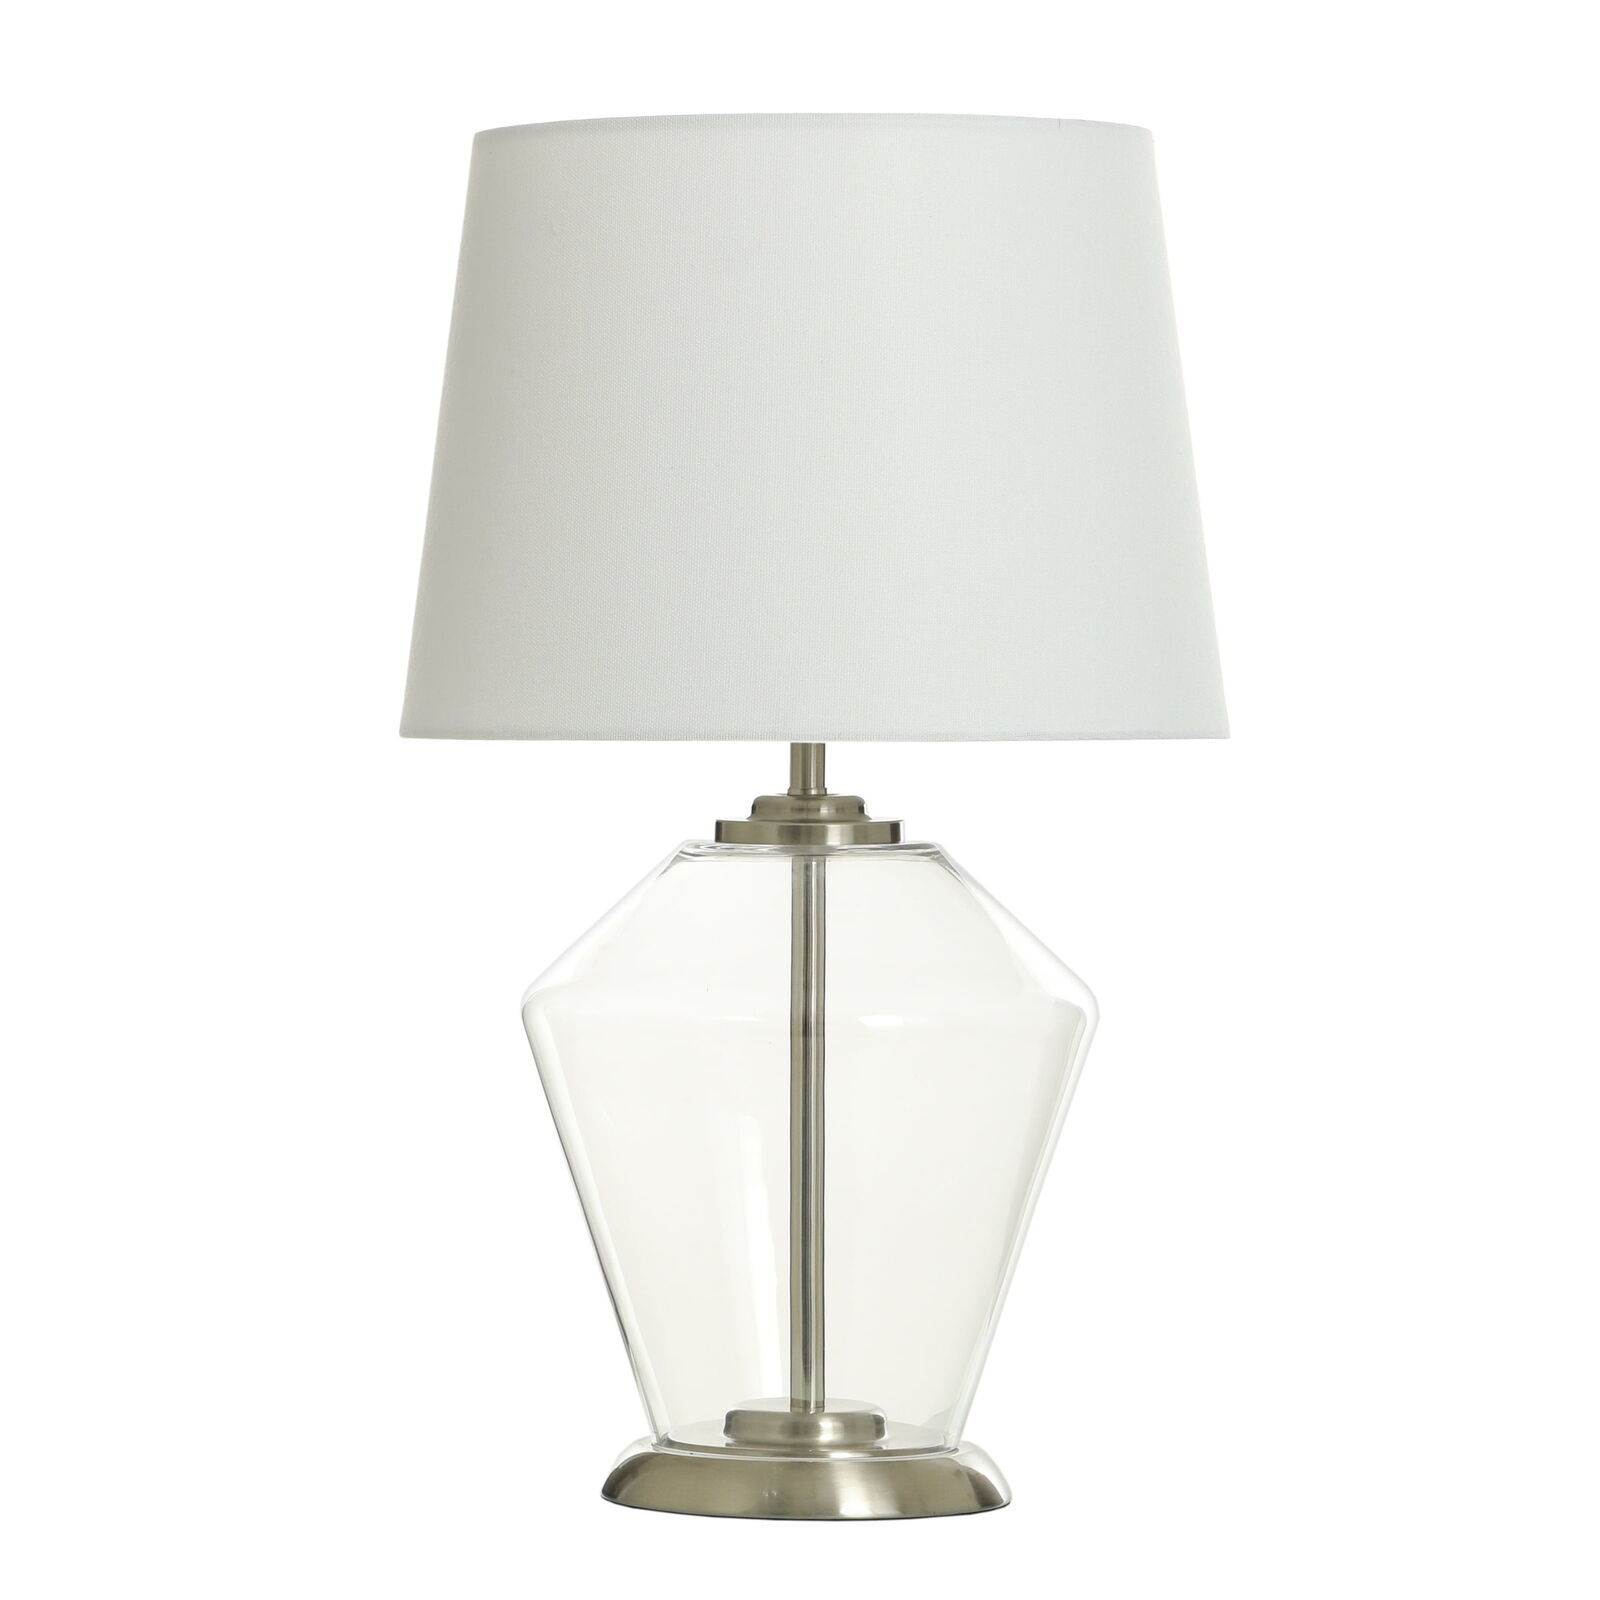 Beter Homes & Gardens Glass Kite Lamp with White Tapered Drum Shade